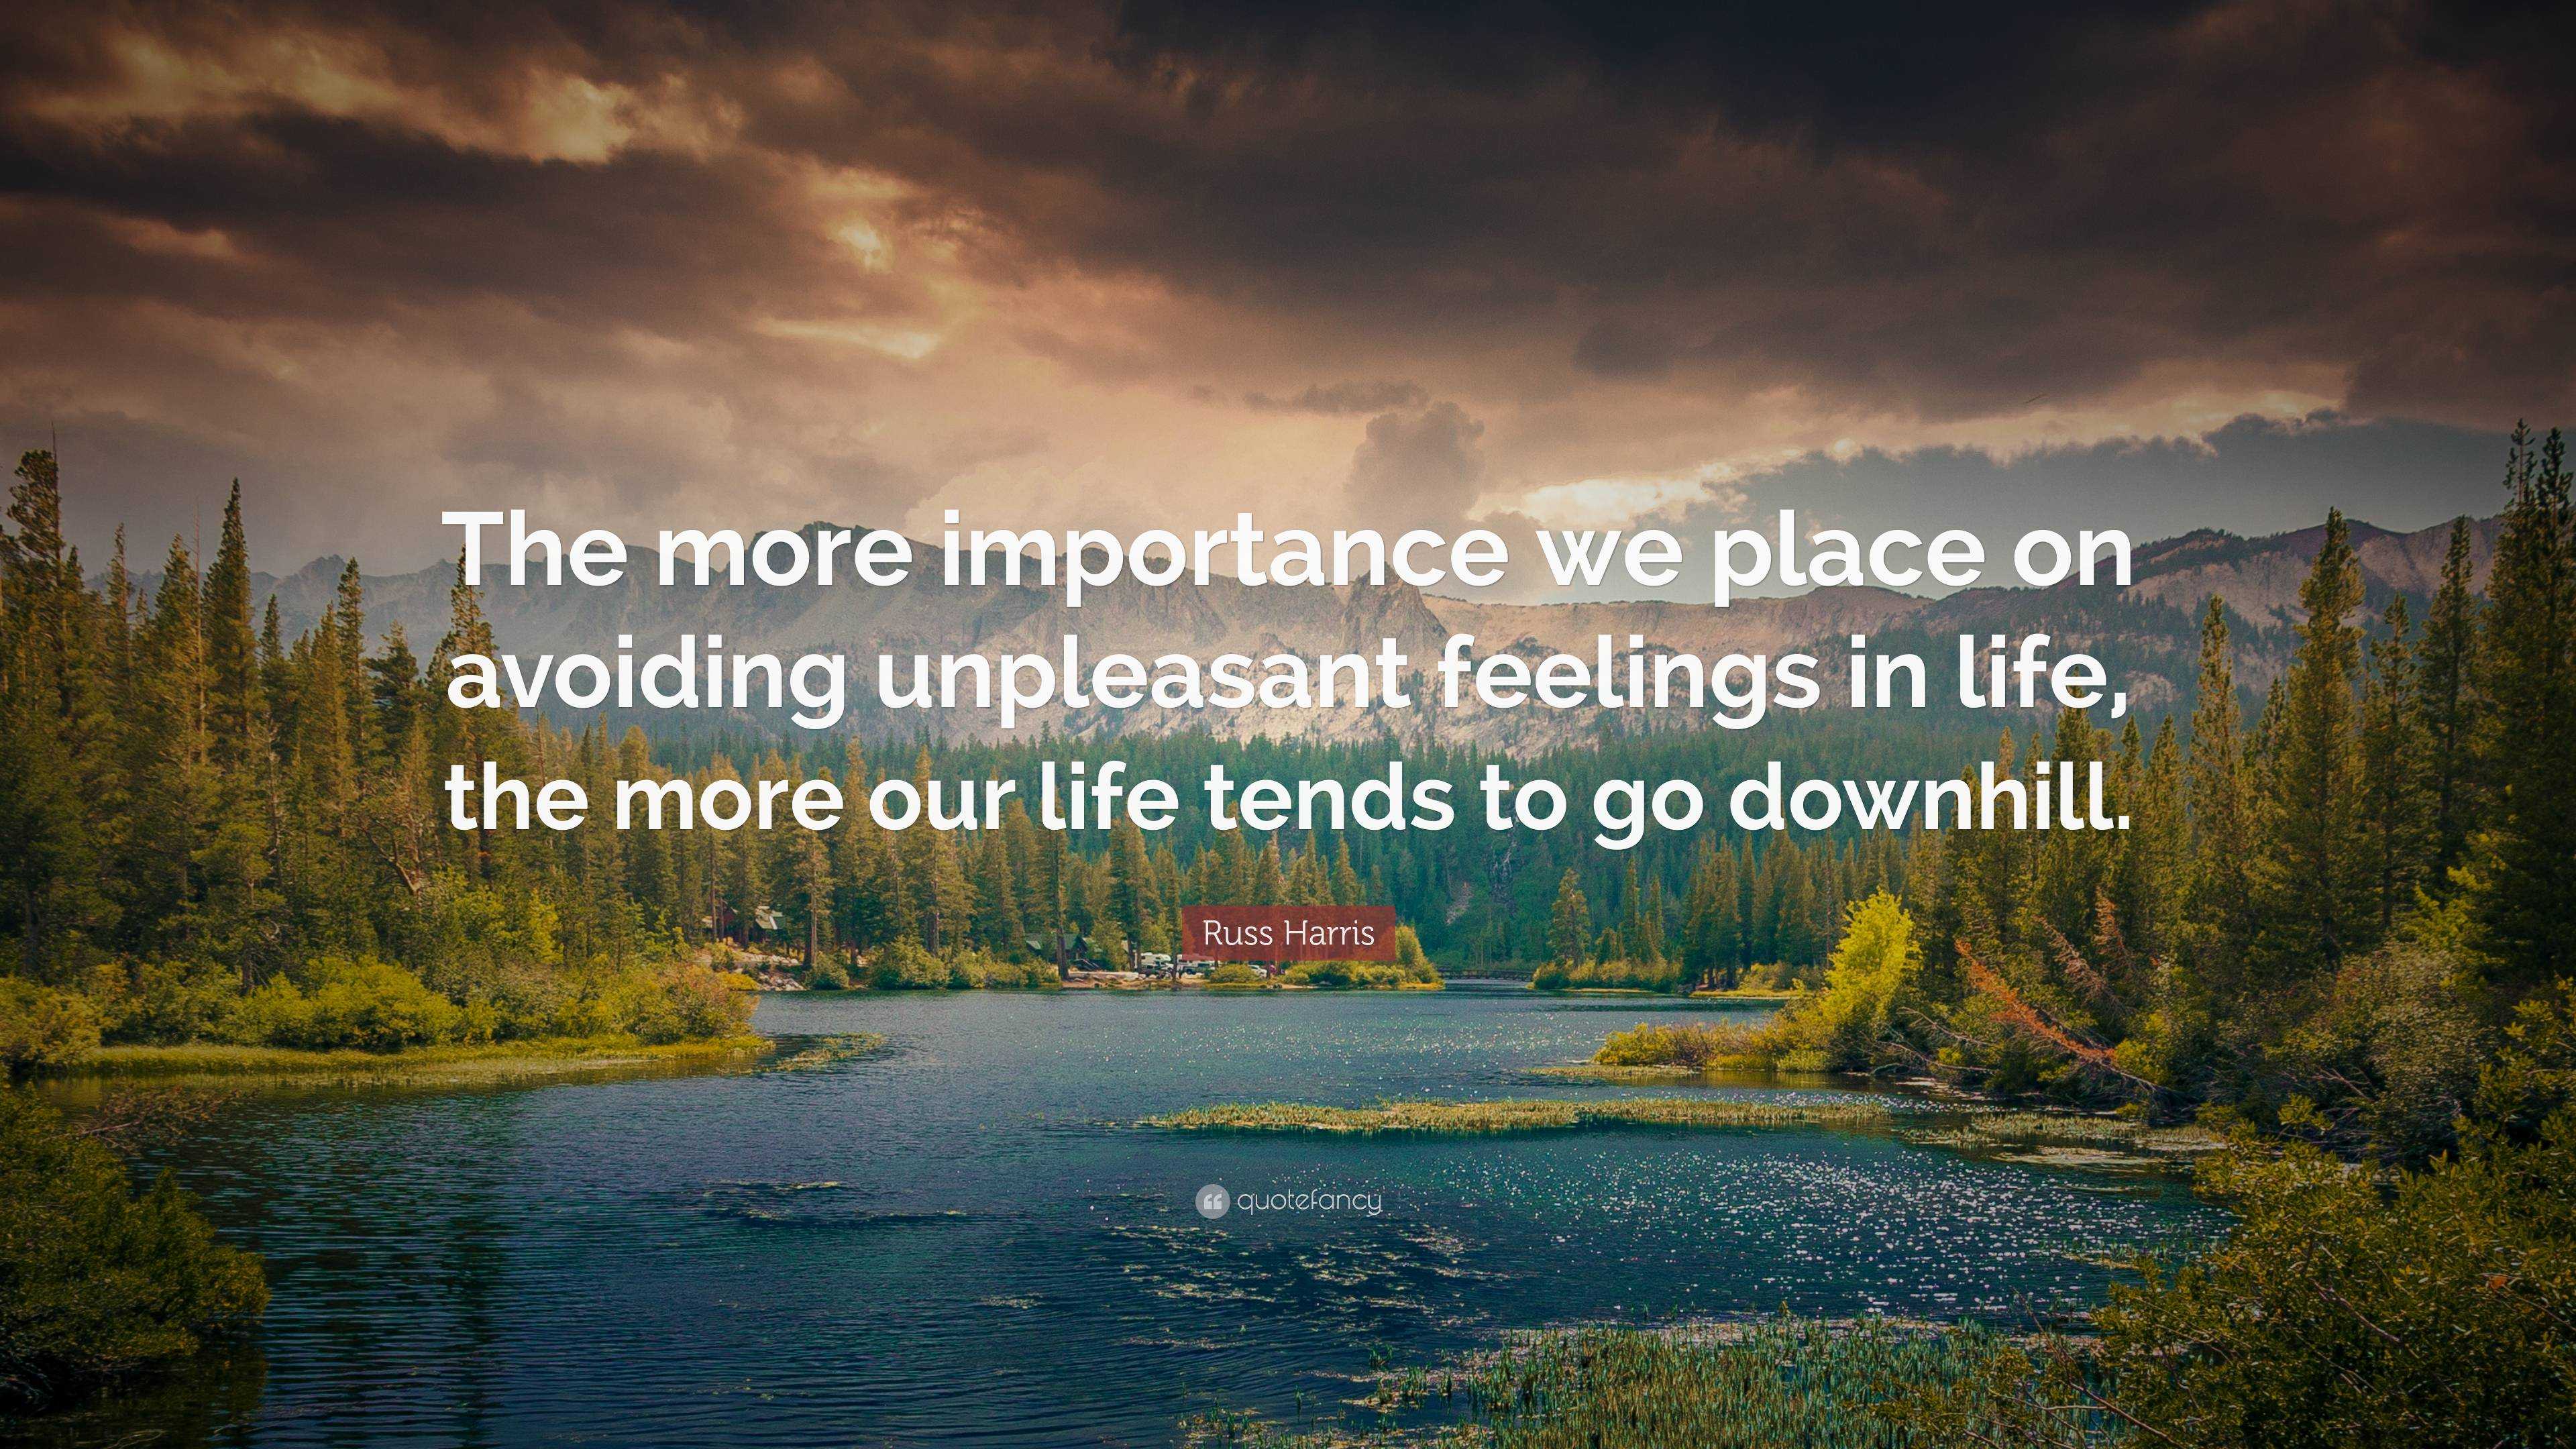 Russ Harris Quote: “The more importance we place on avoiding unpleasant ...